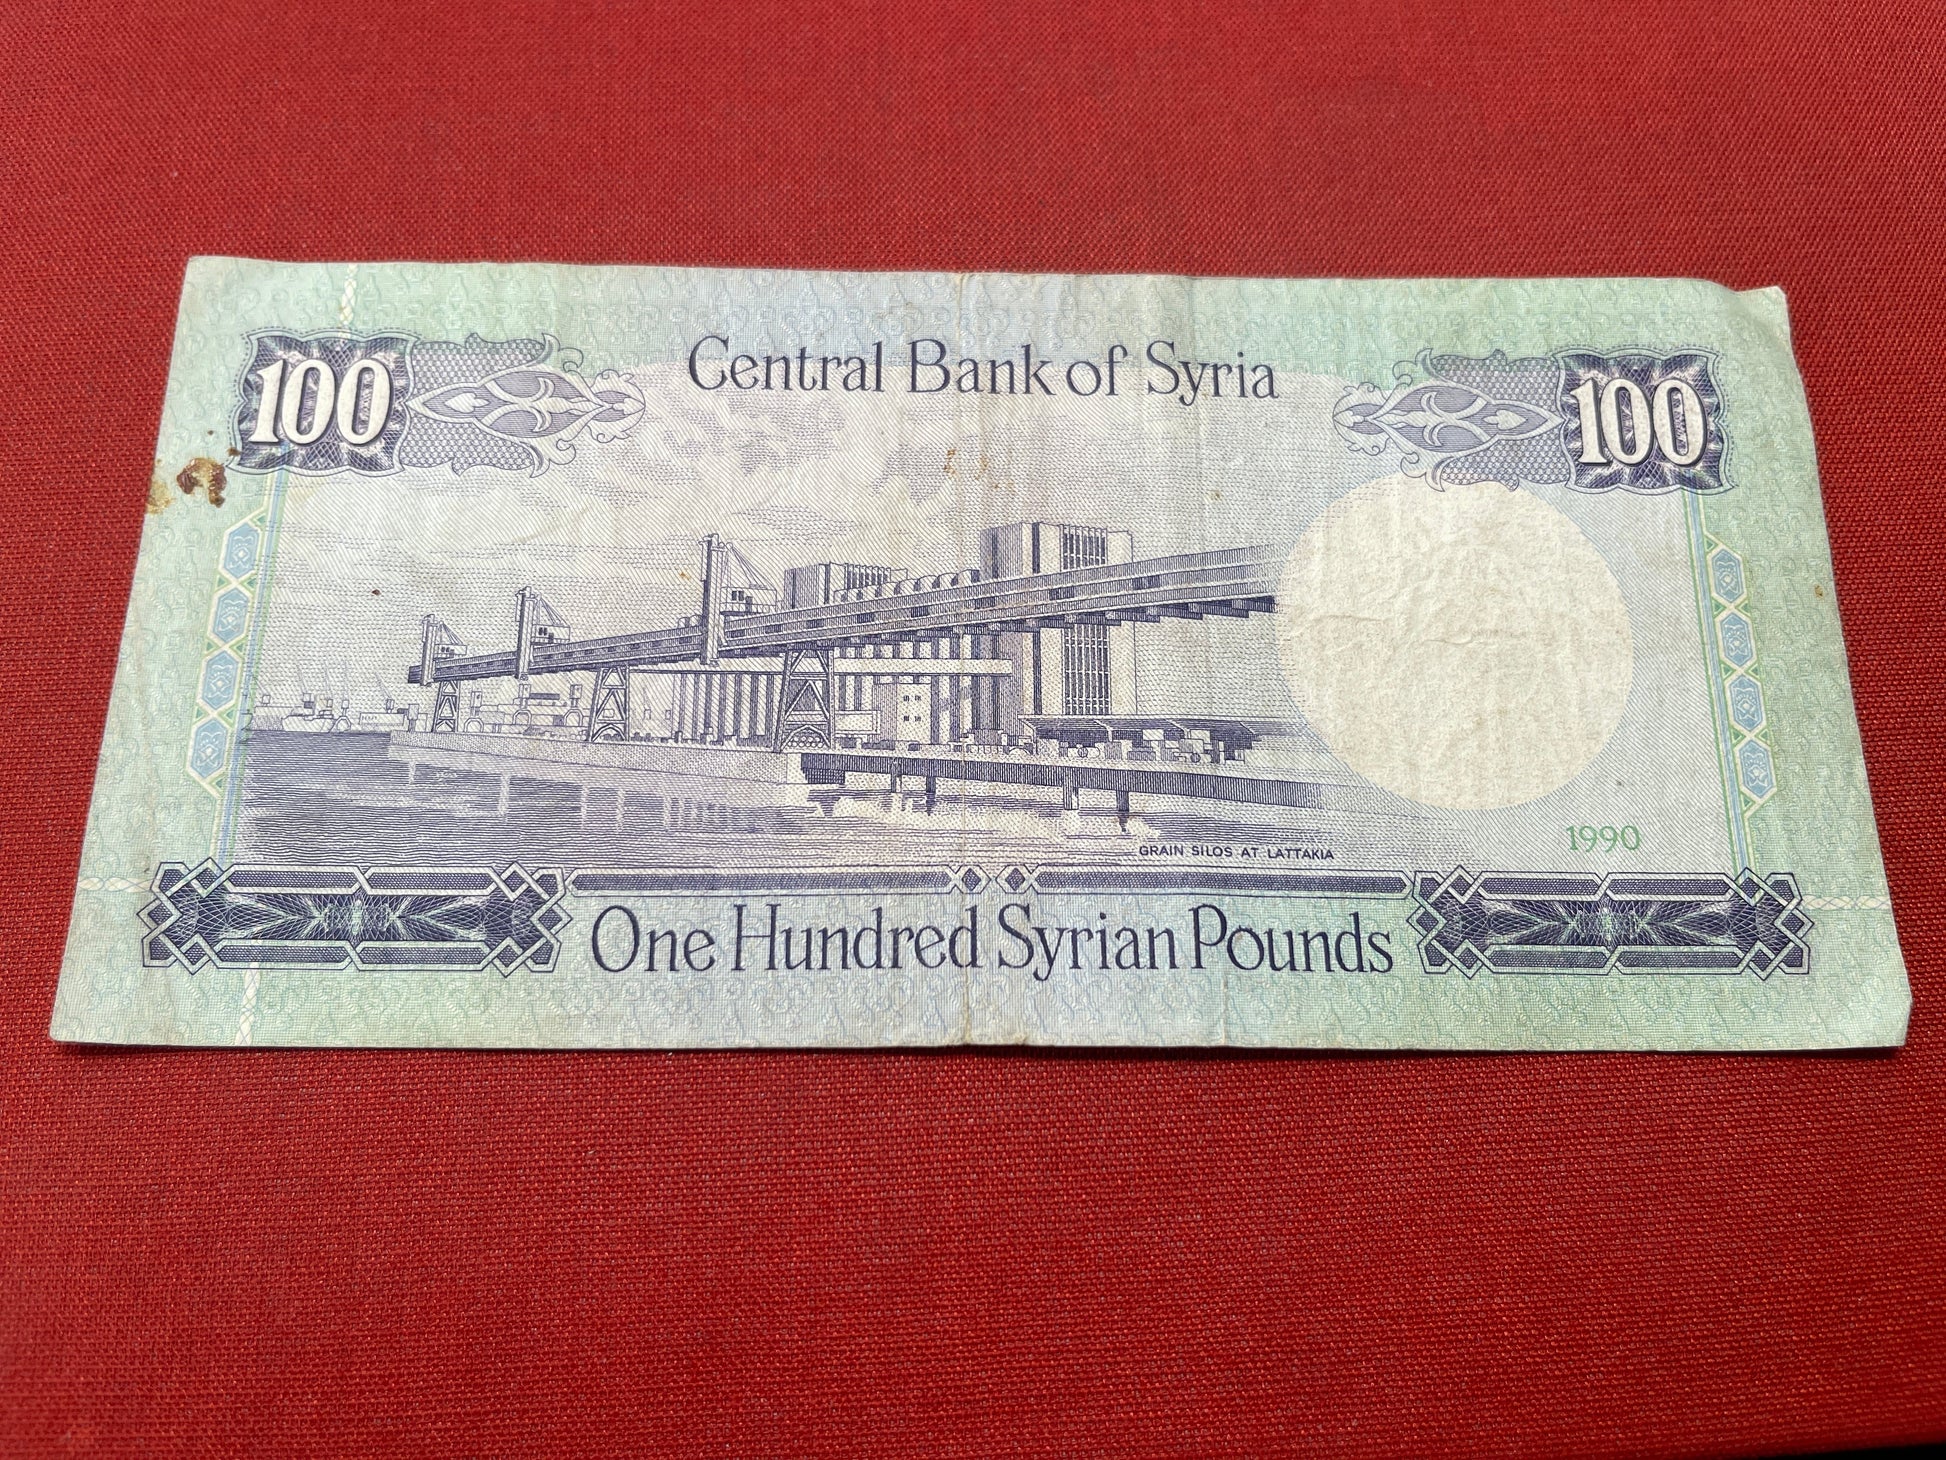 Central Bak of Syria 100 Syrian Pounds